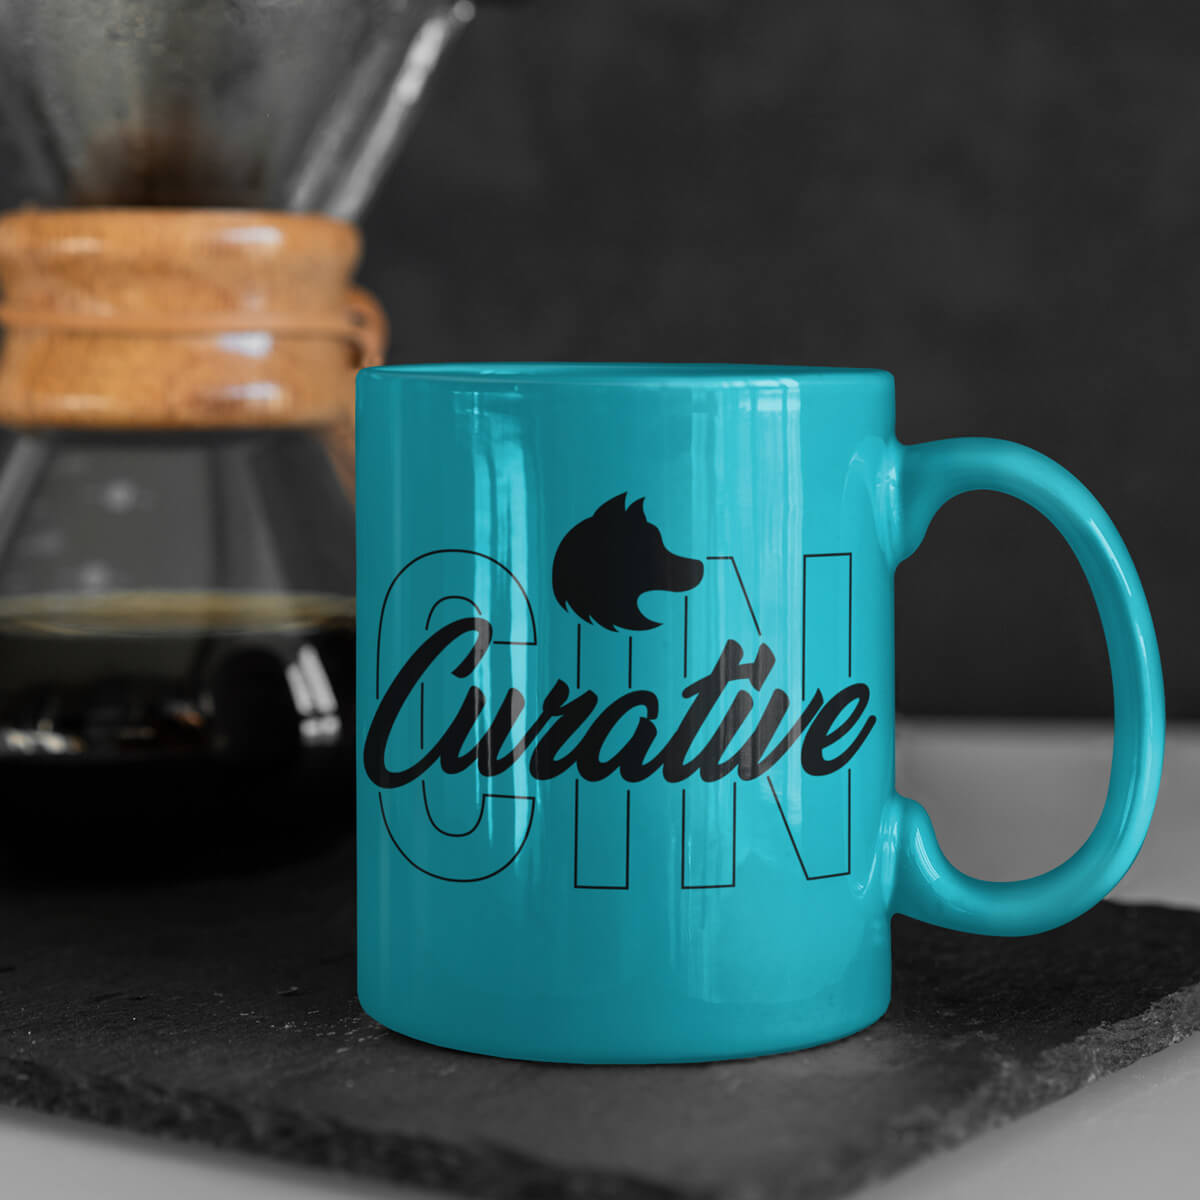 Coffee station with turquoise ceramic mugs custom promotional drinkware by curative printing